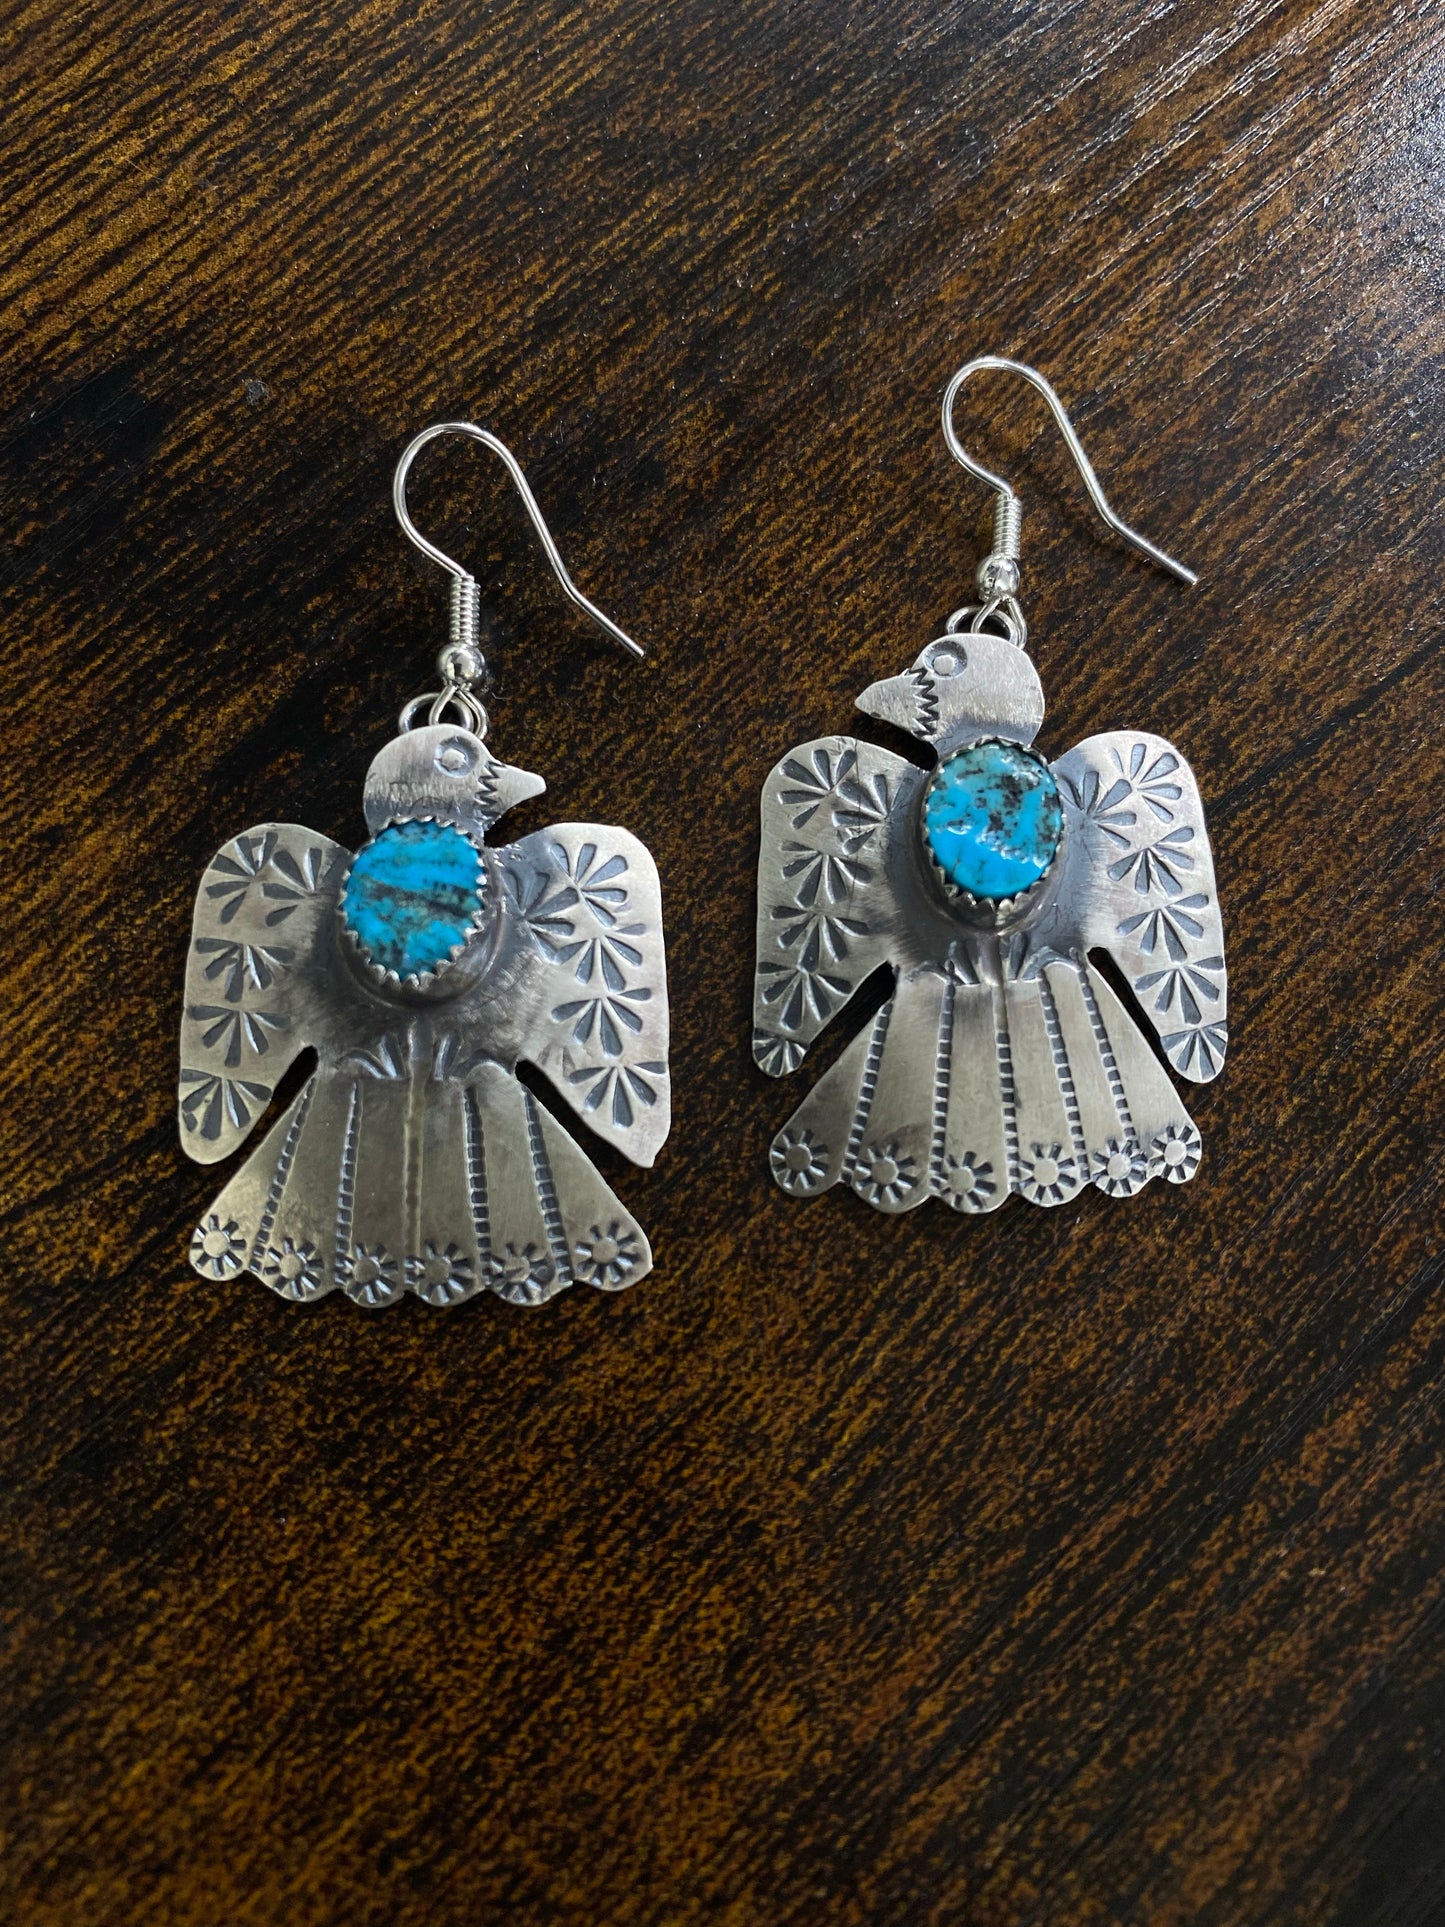 The Thunderbird Authentic turquoise earrings